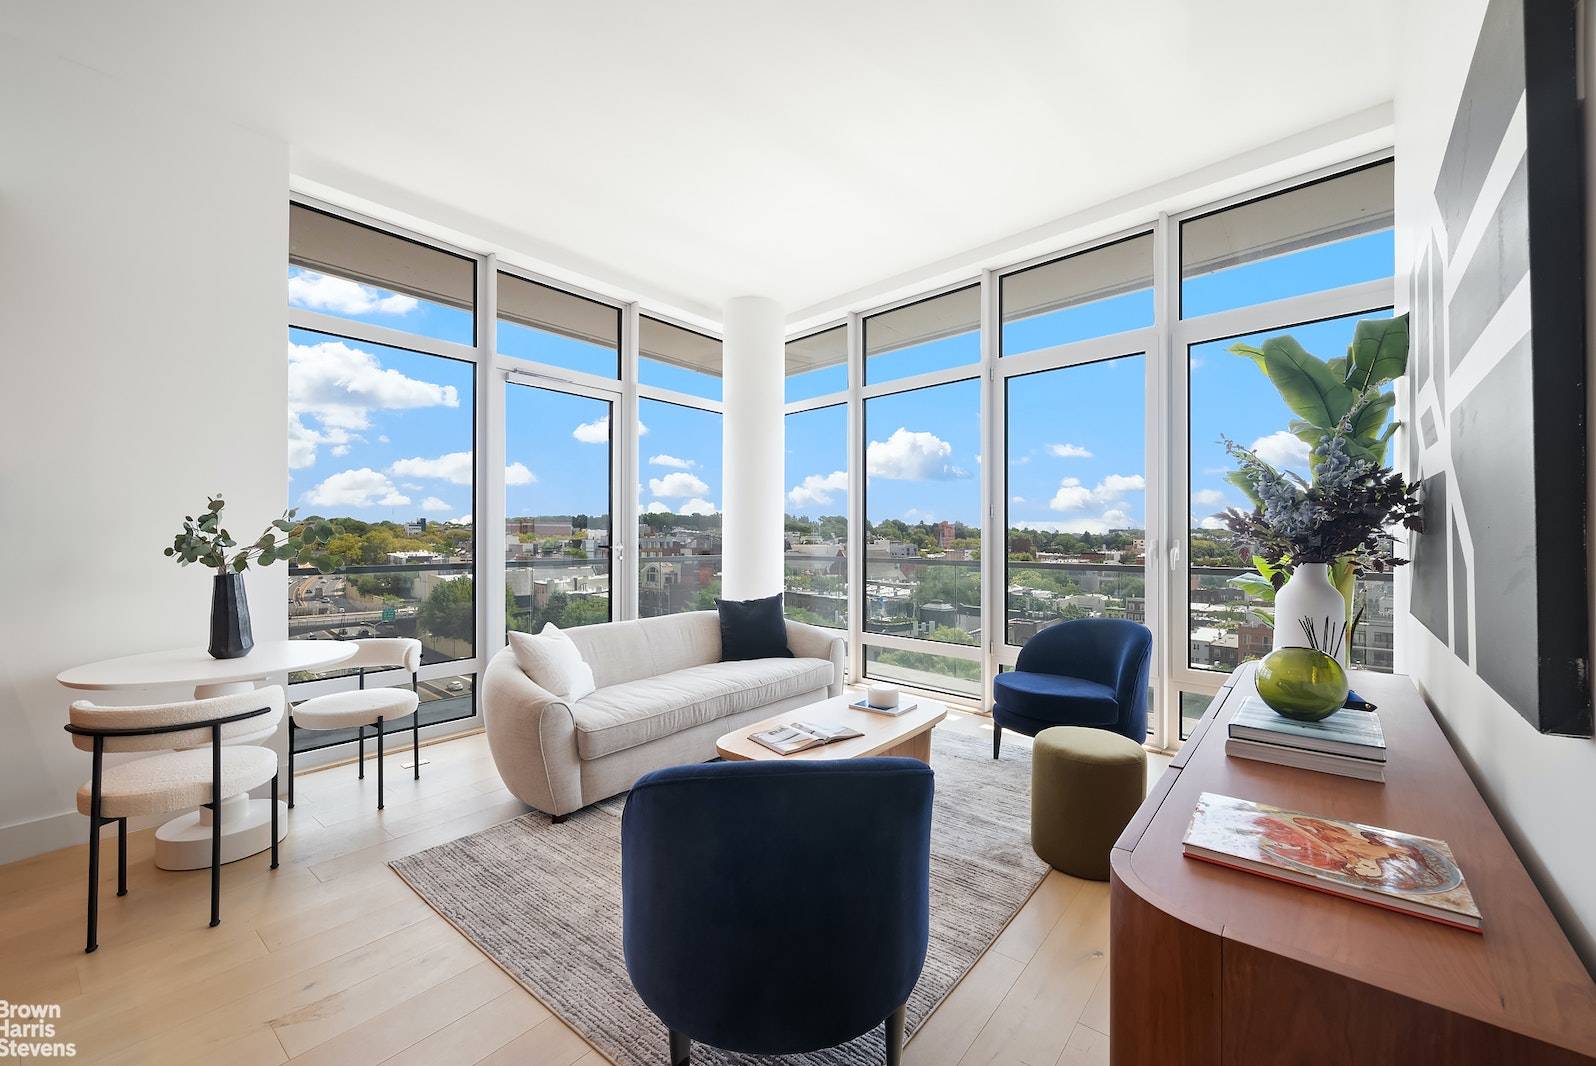 Penthouse with Bridge and Harbor Views Please contact our sales team to schedule a private showing.